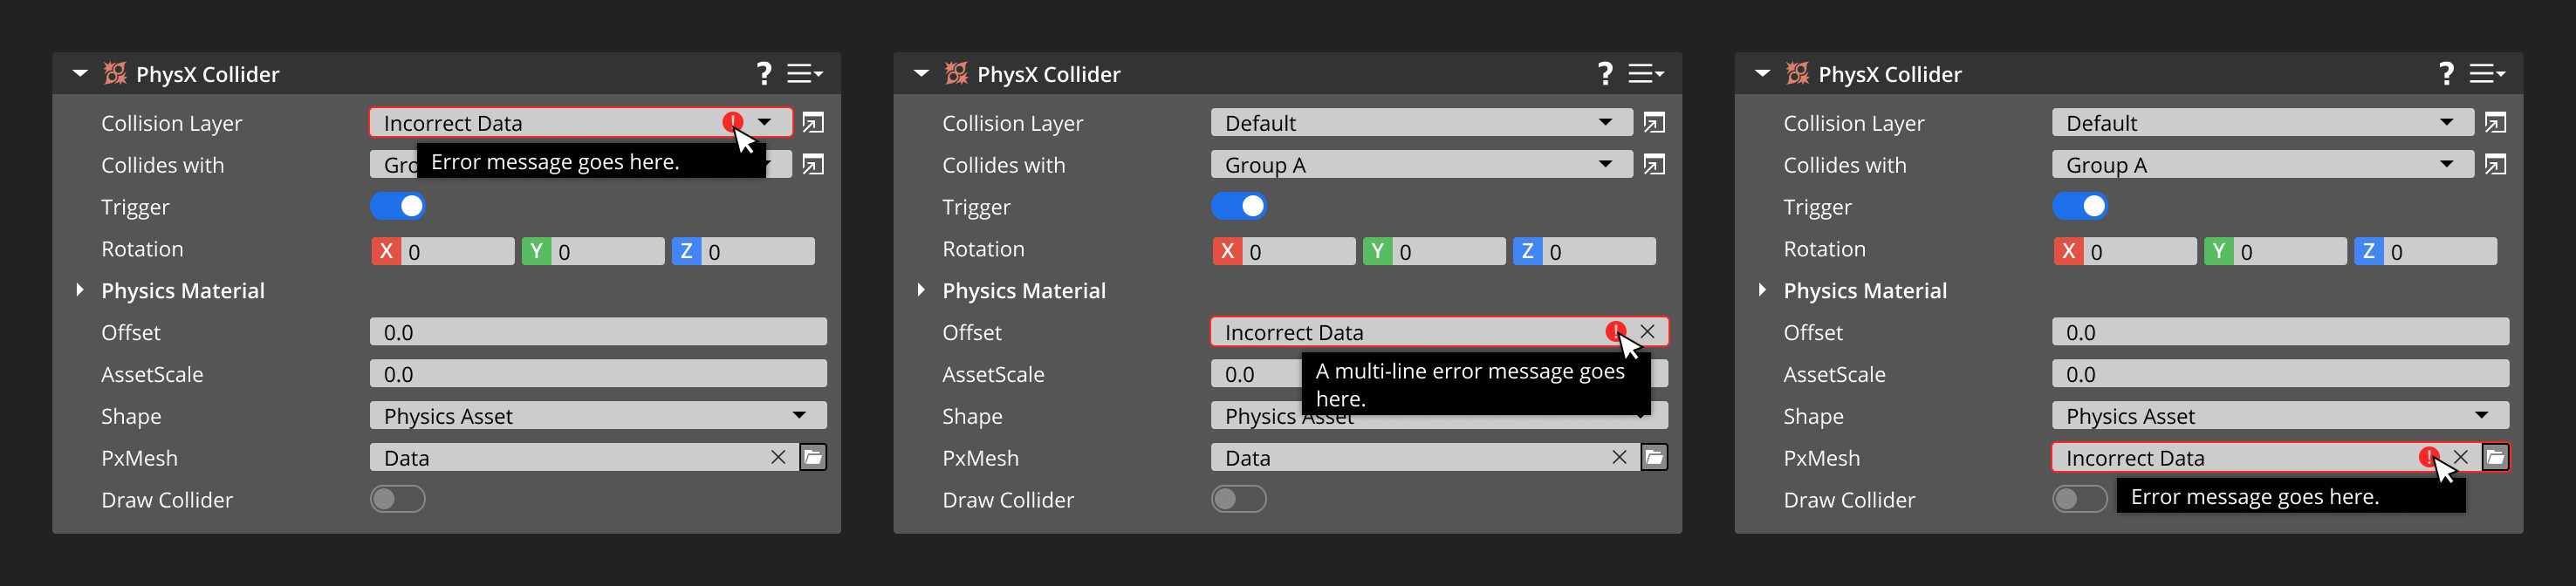 Text Input Validation Tooltips